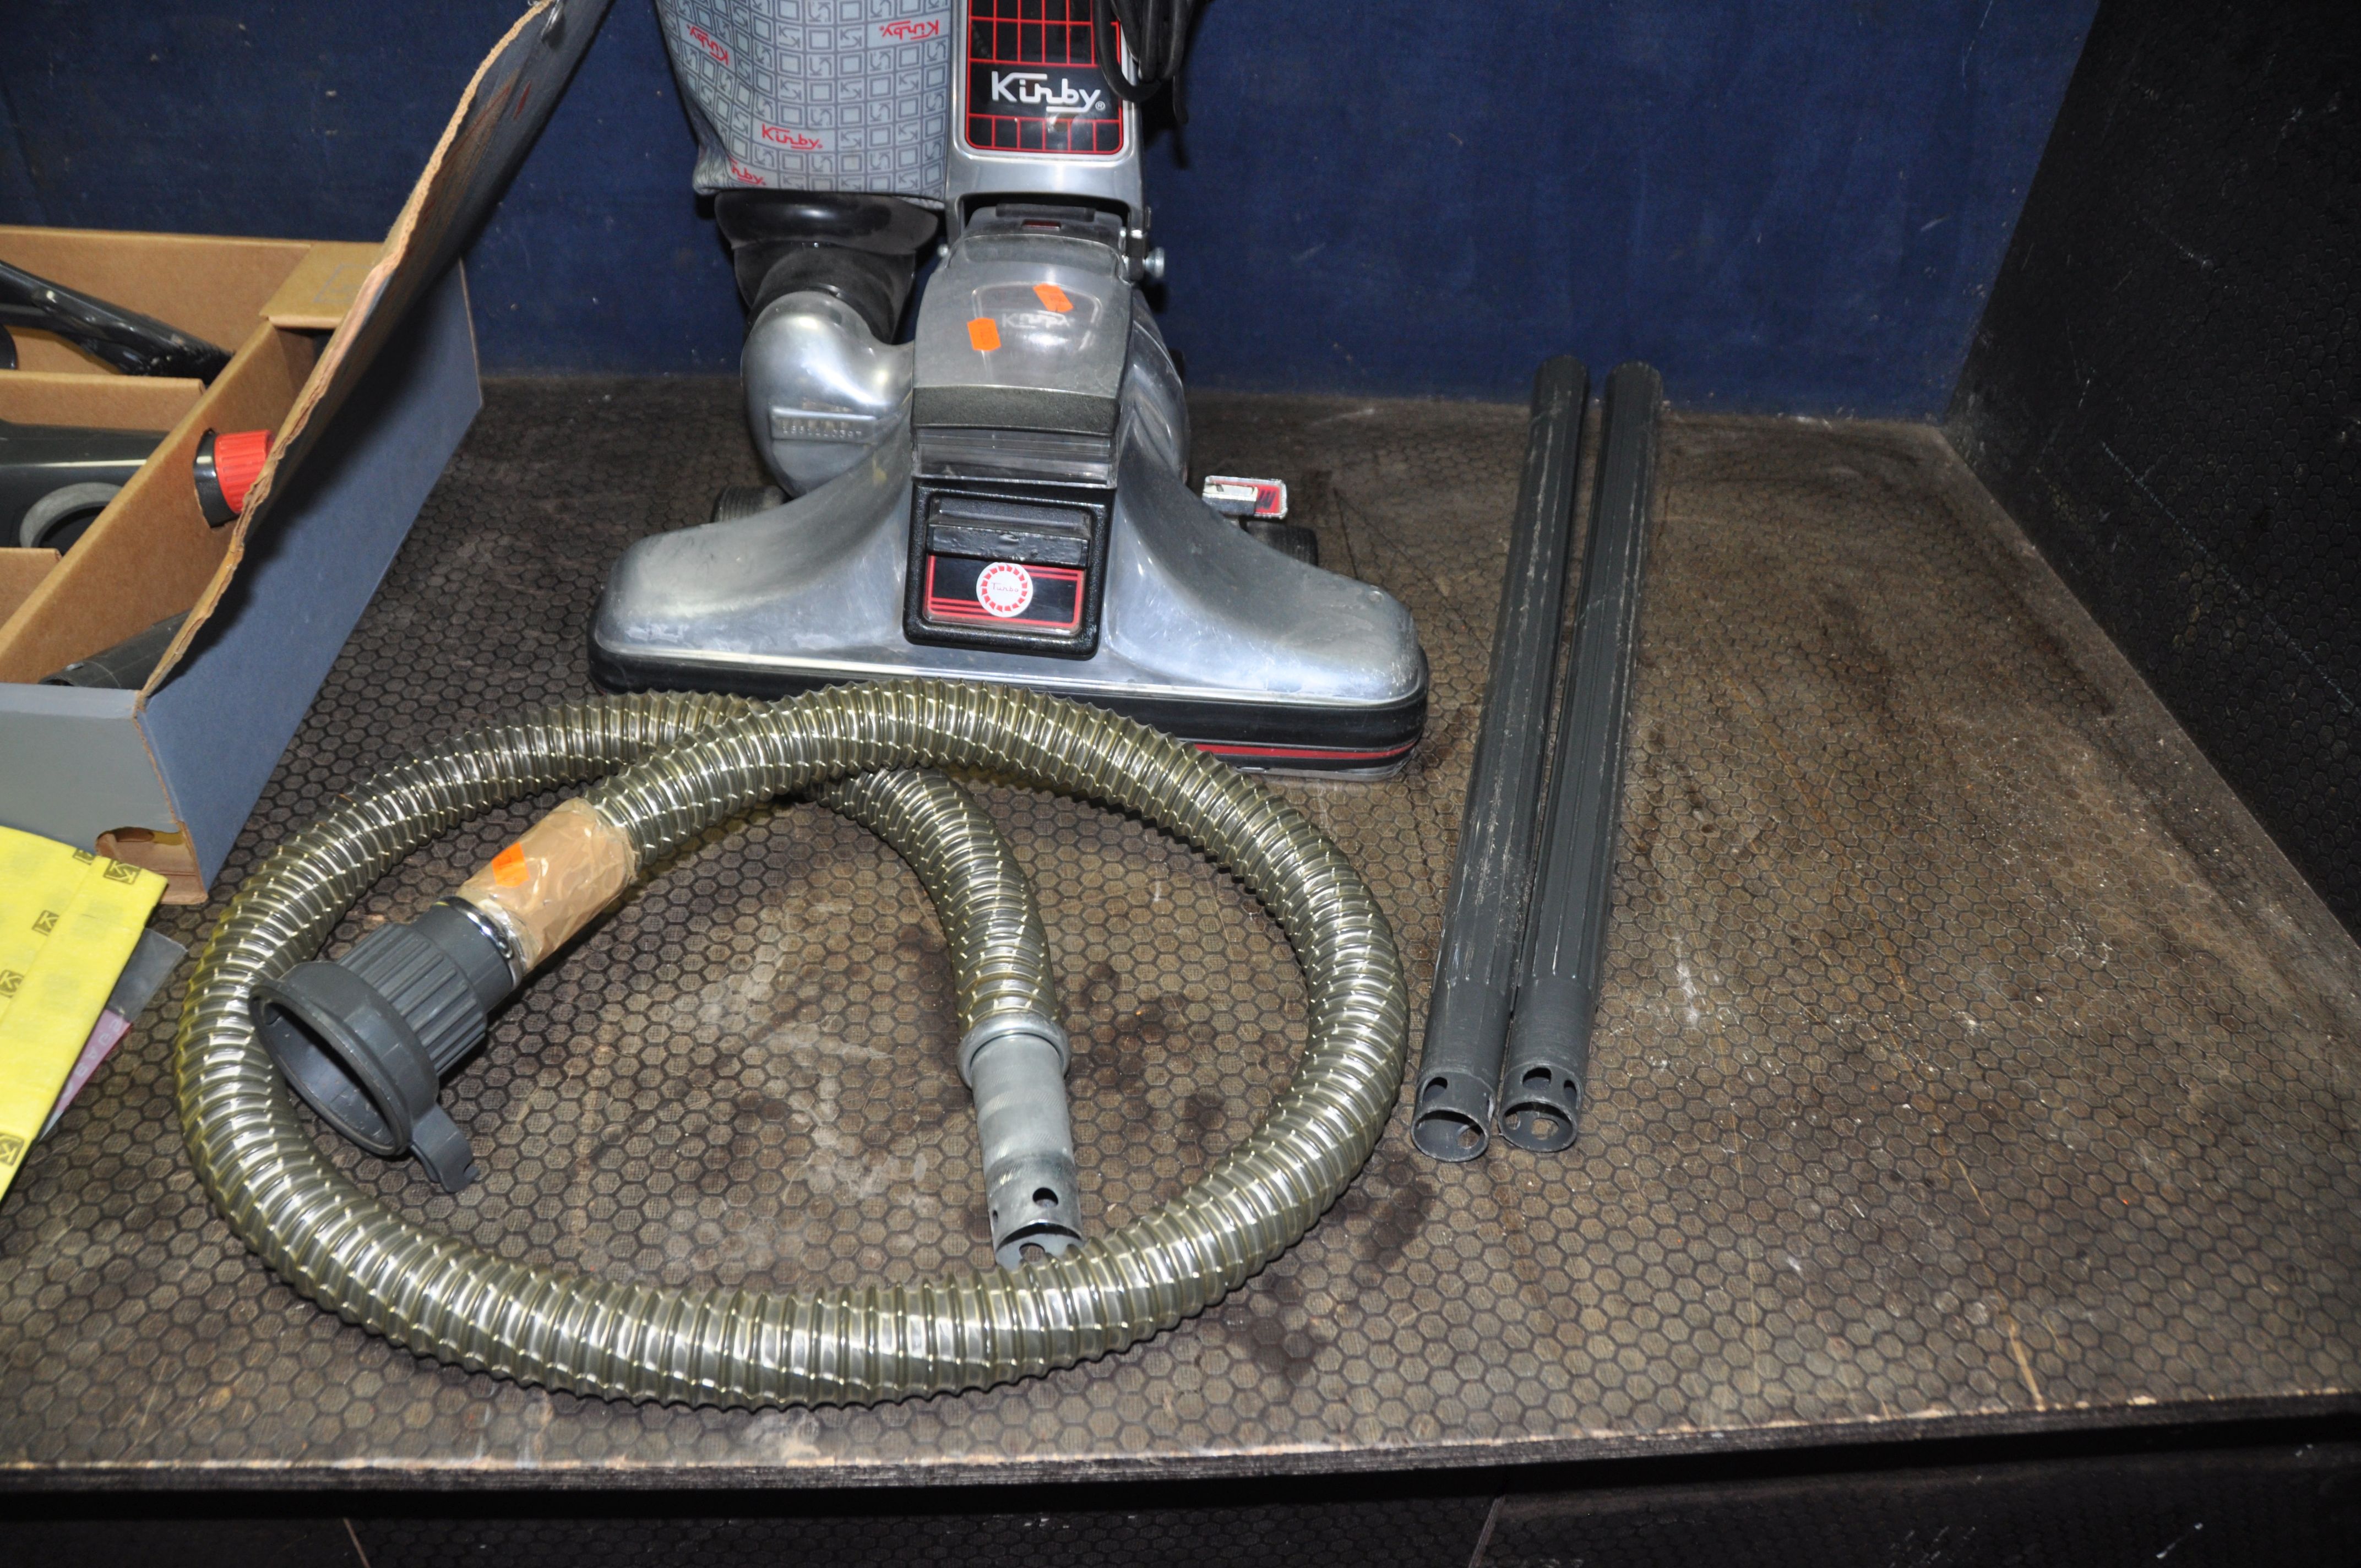 A KIRBY HERITAGE 2 UPRIGHT VACUUM CLEANER with accessory box, pipework and tubes (PAT pass and - Image 3 of 3